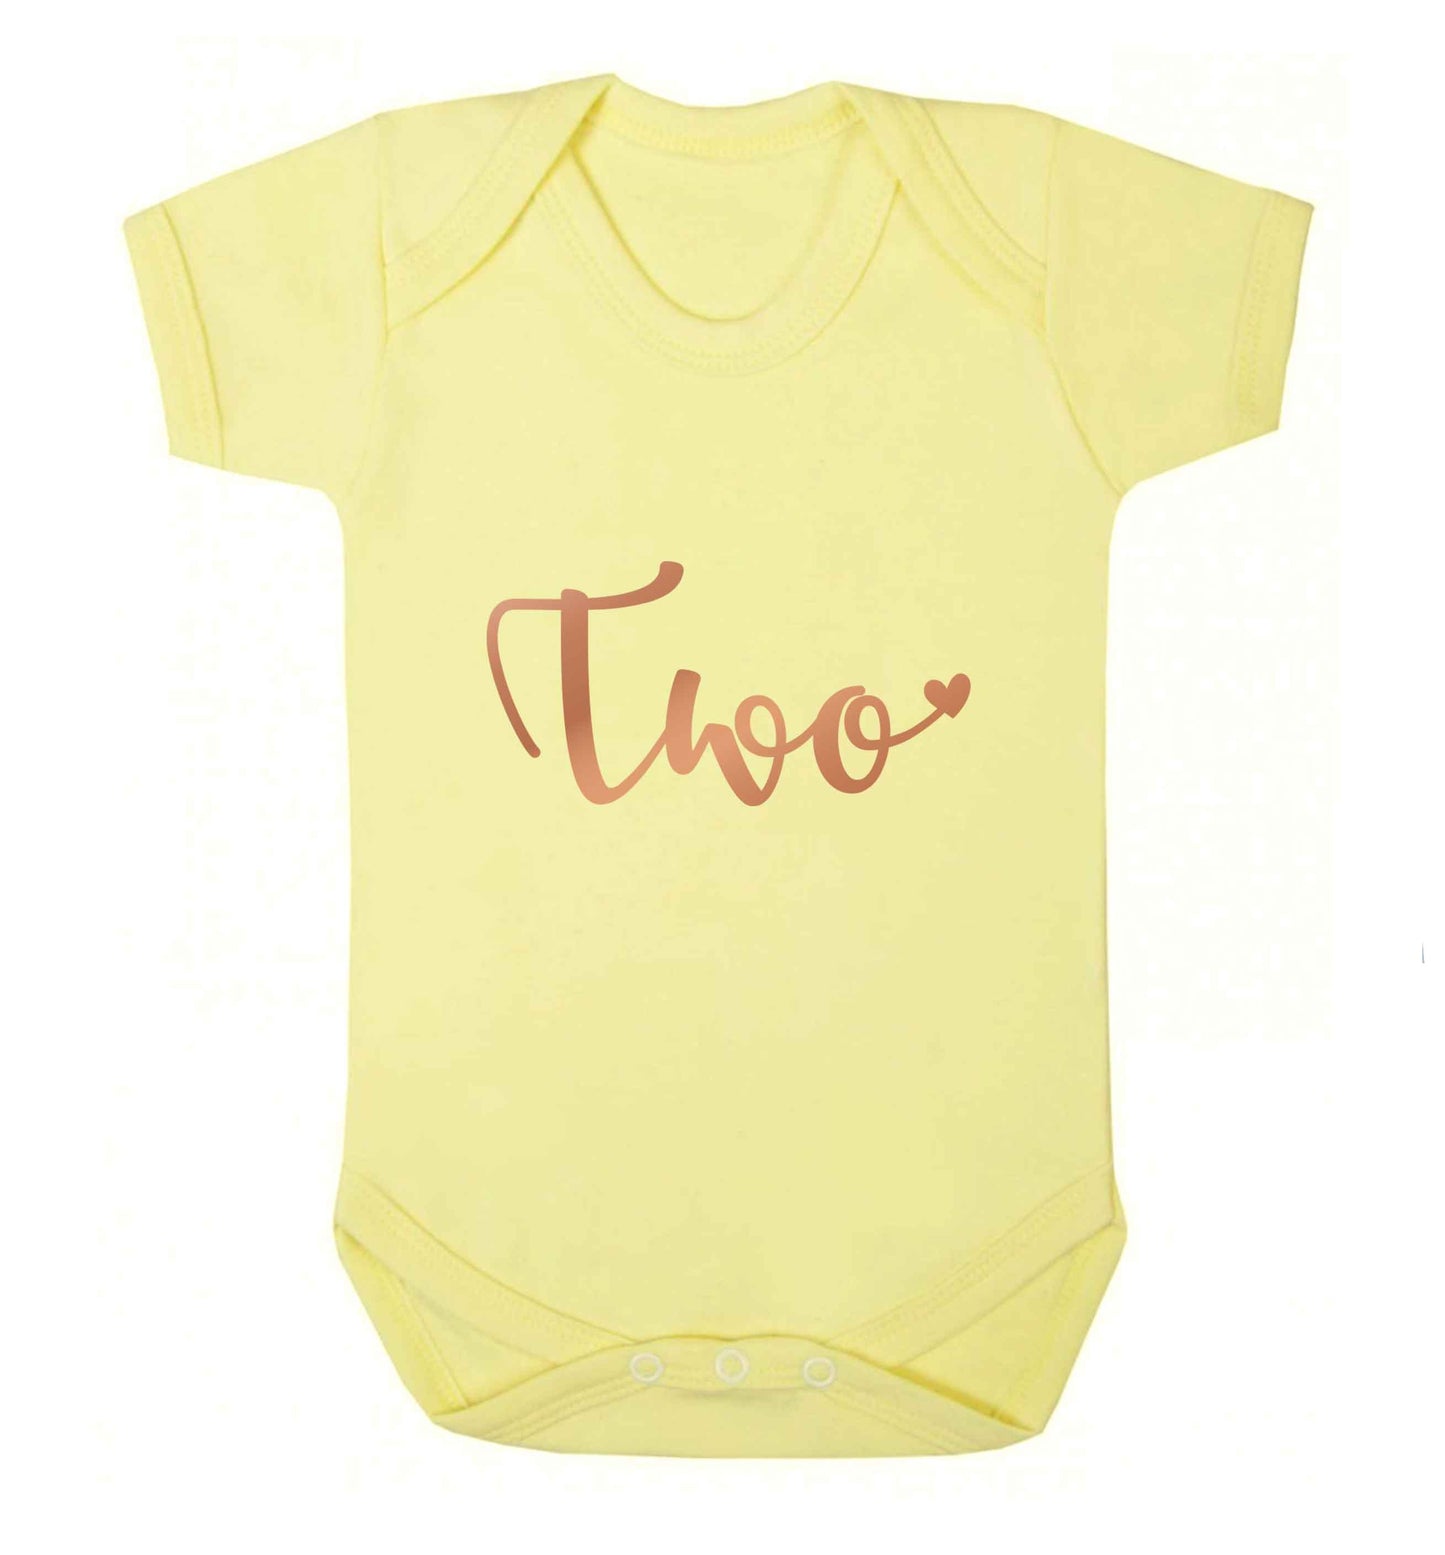 Two rose gold baby vest pale yellow 18-24 months